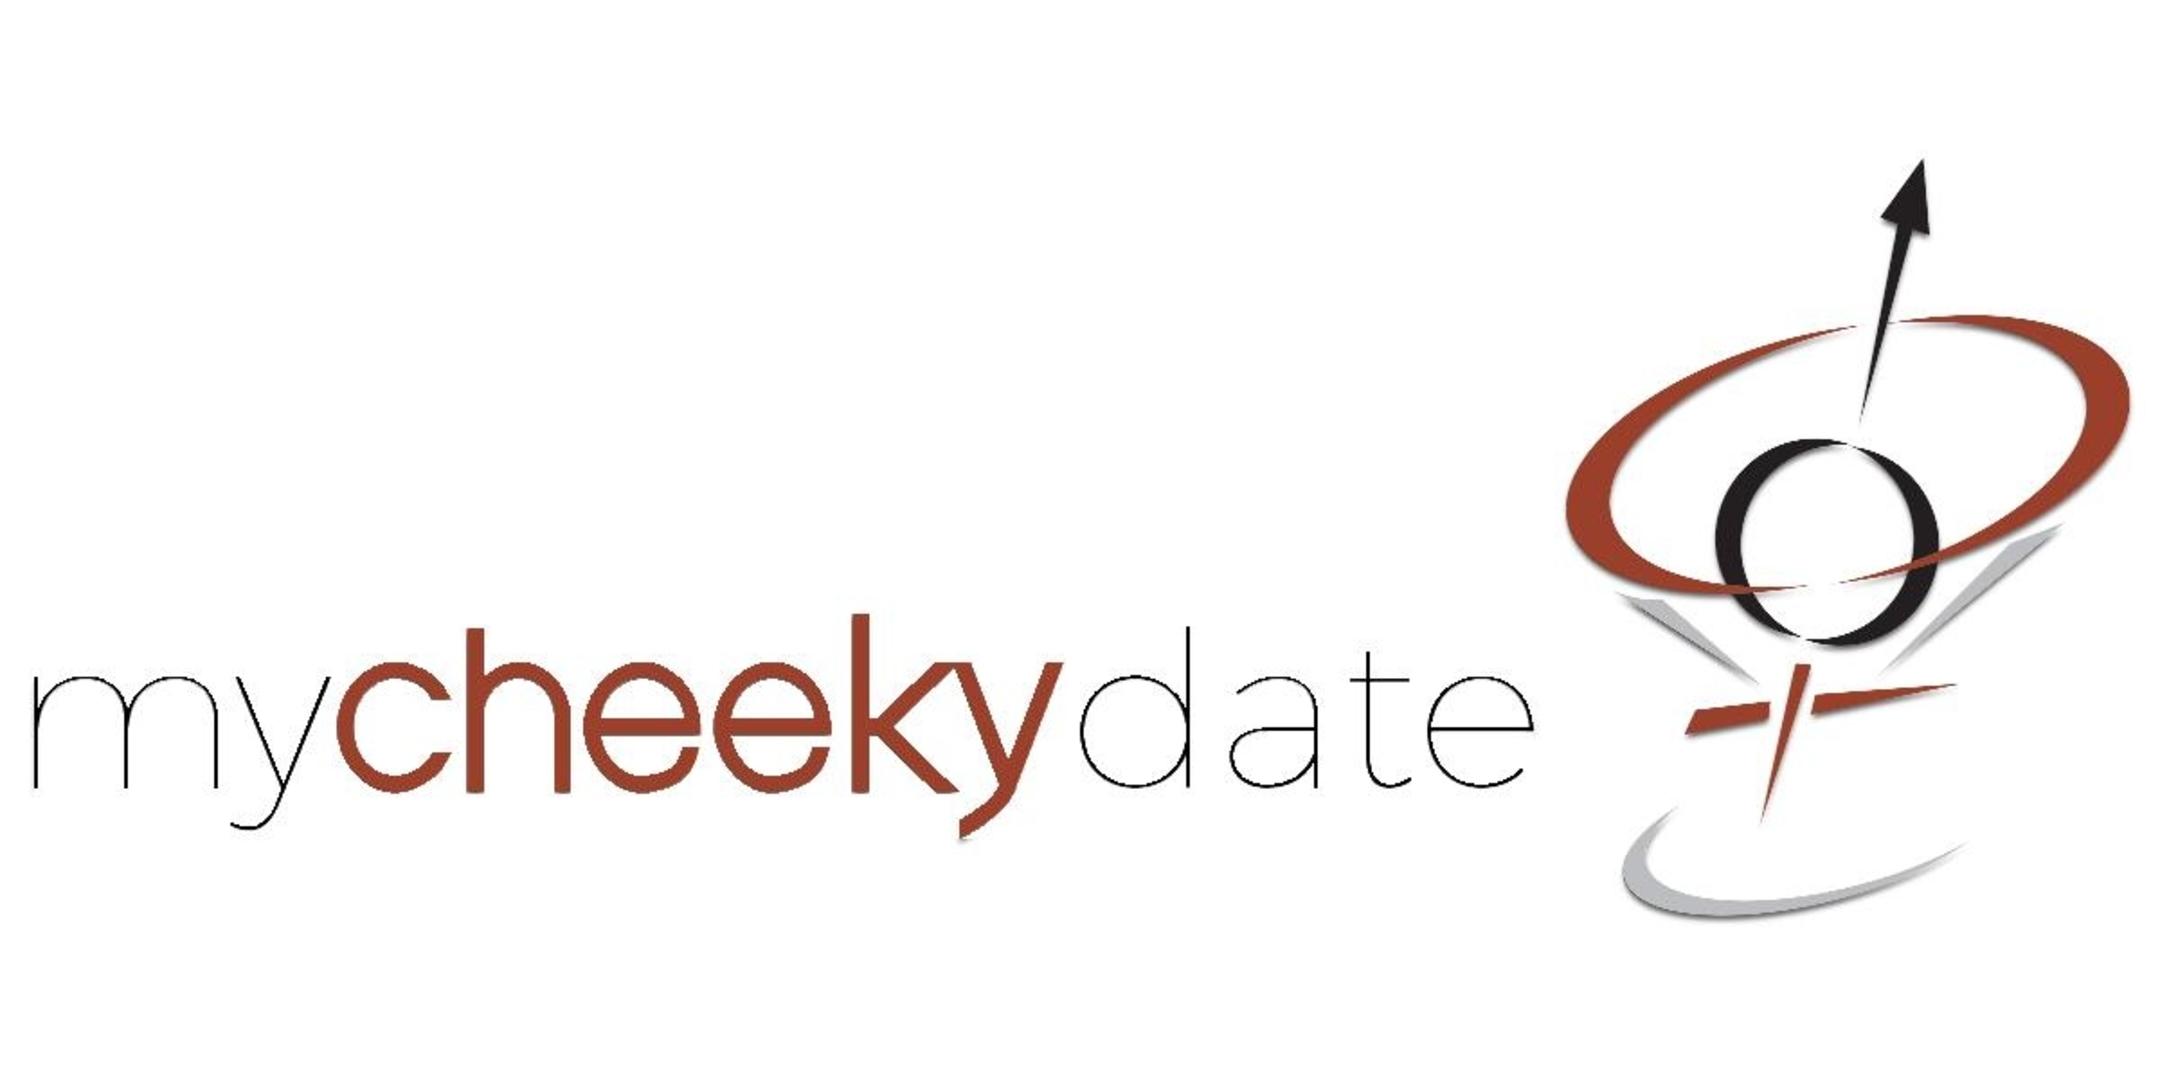 Speed Dating in Phoenix | Singles Events | Let’s Get Cheeky!